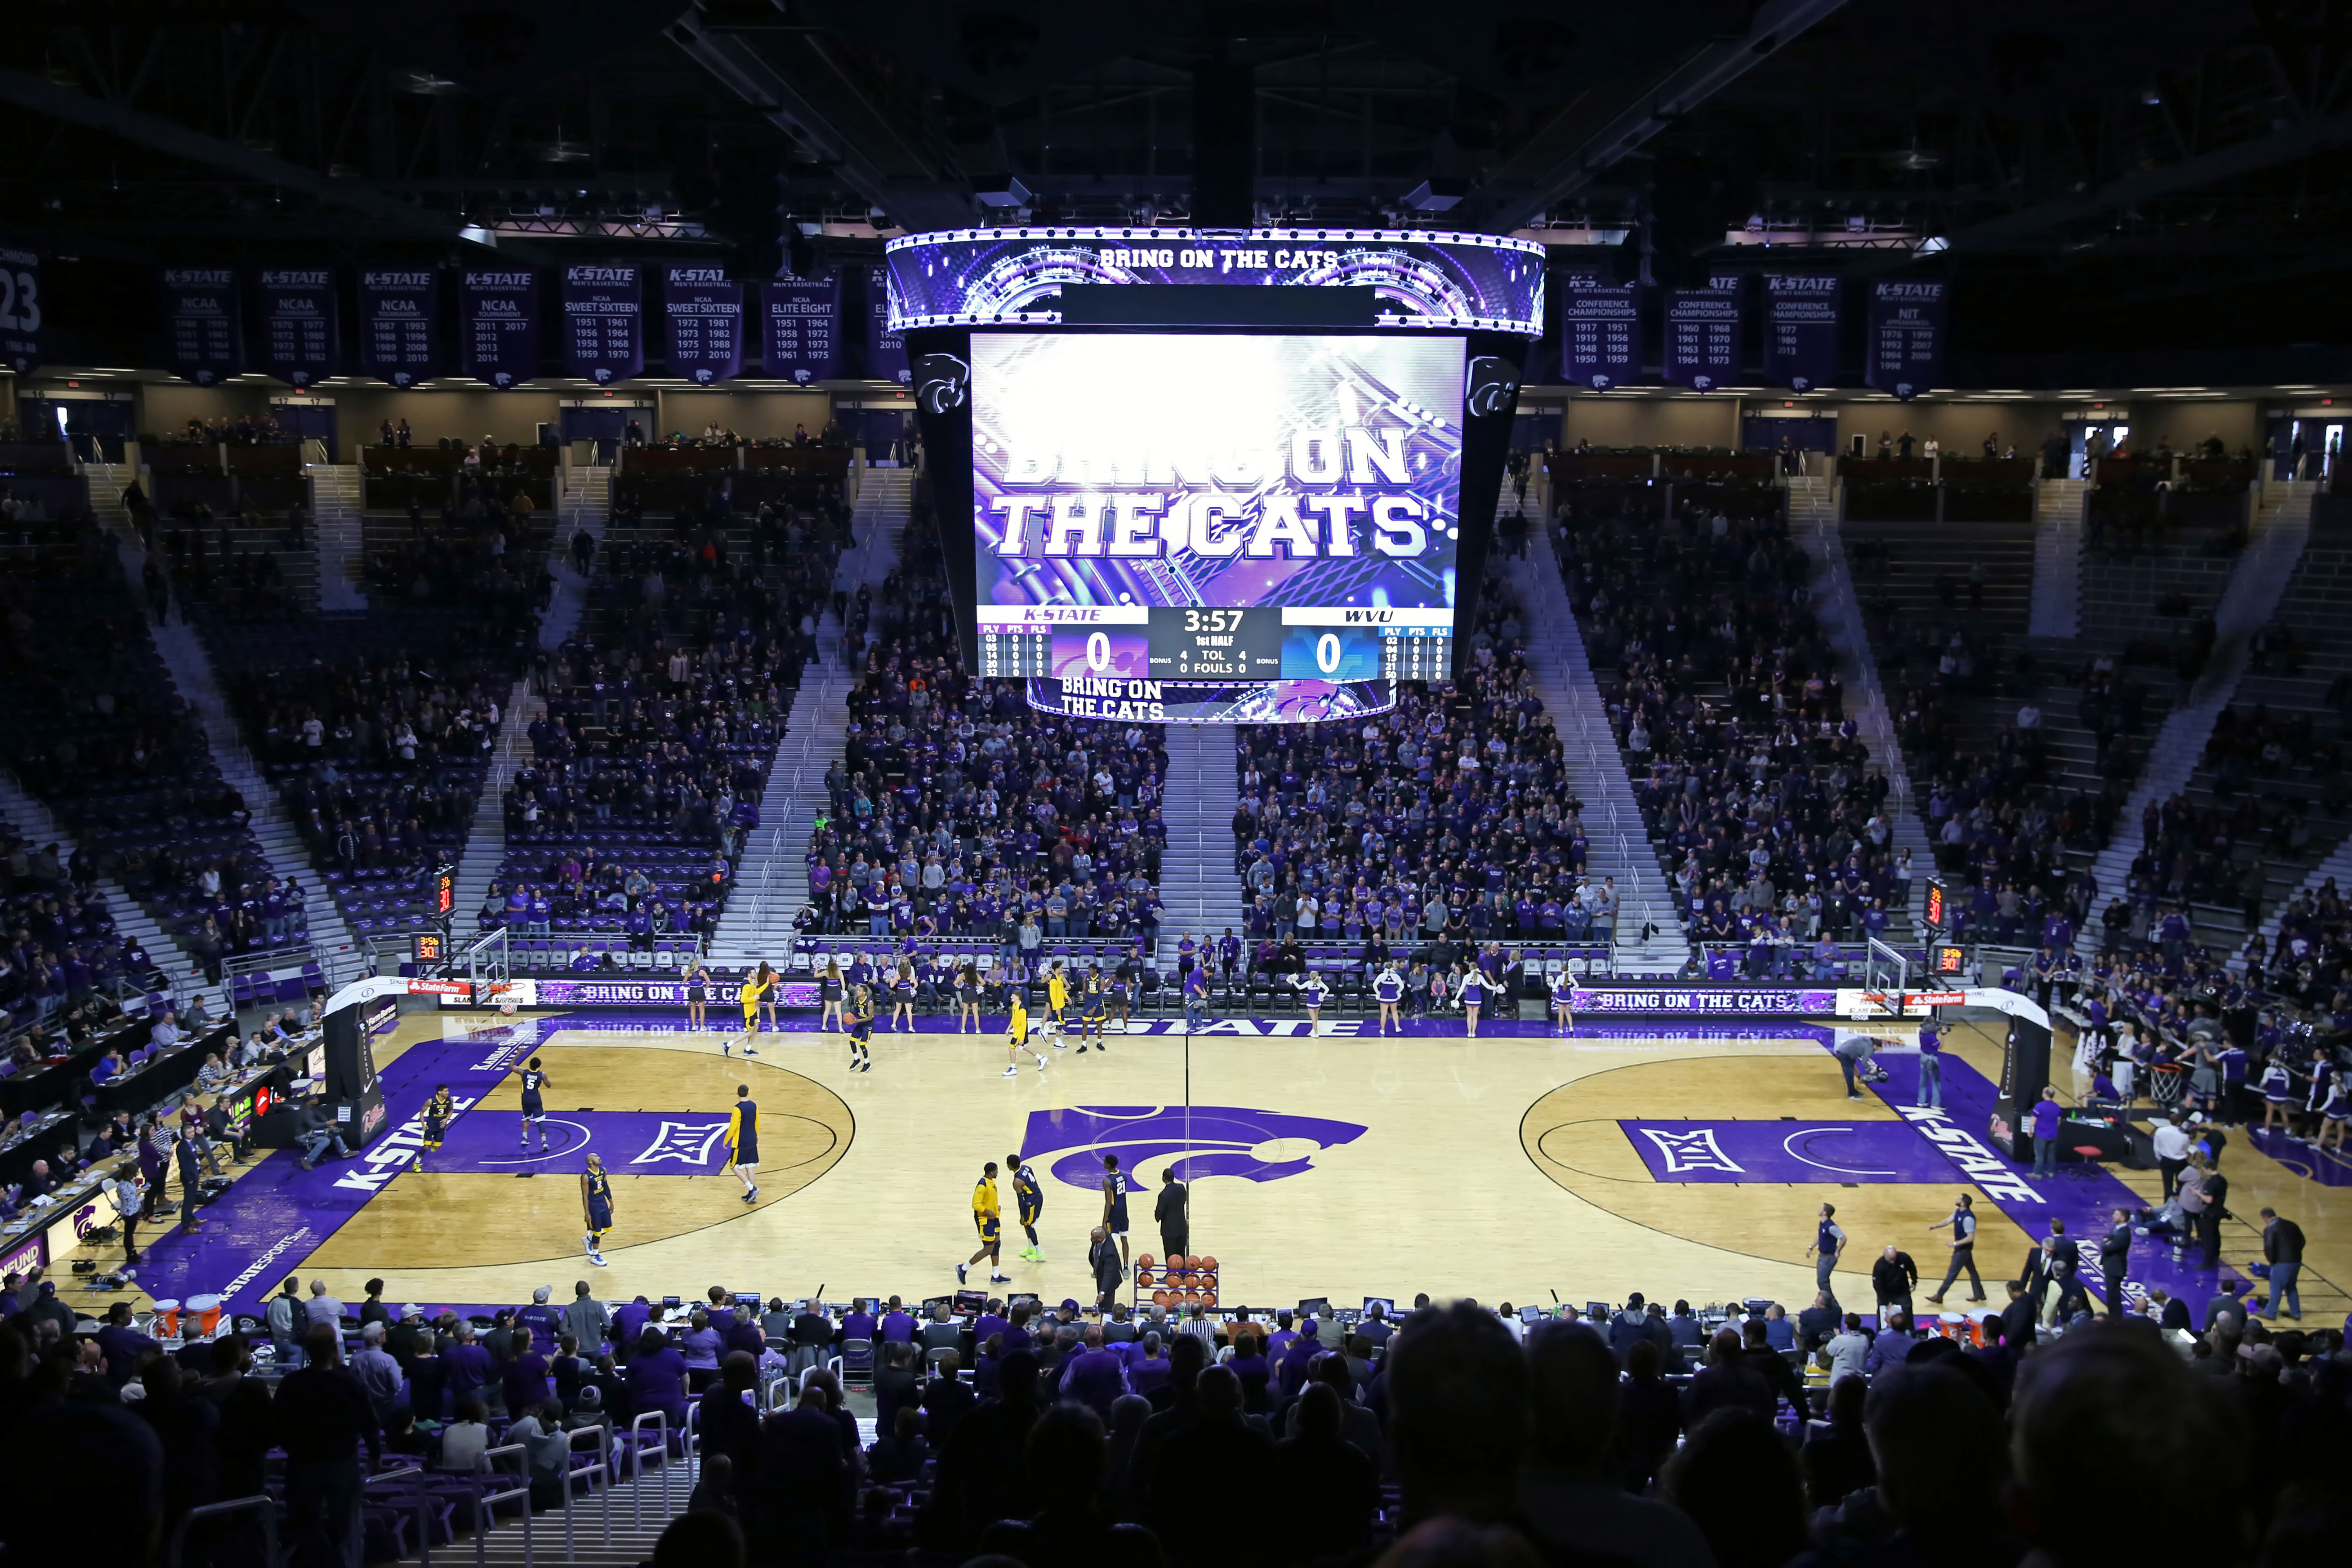 K-State Basketball: Best head coaches of all-time for Kansas State